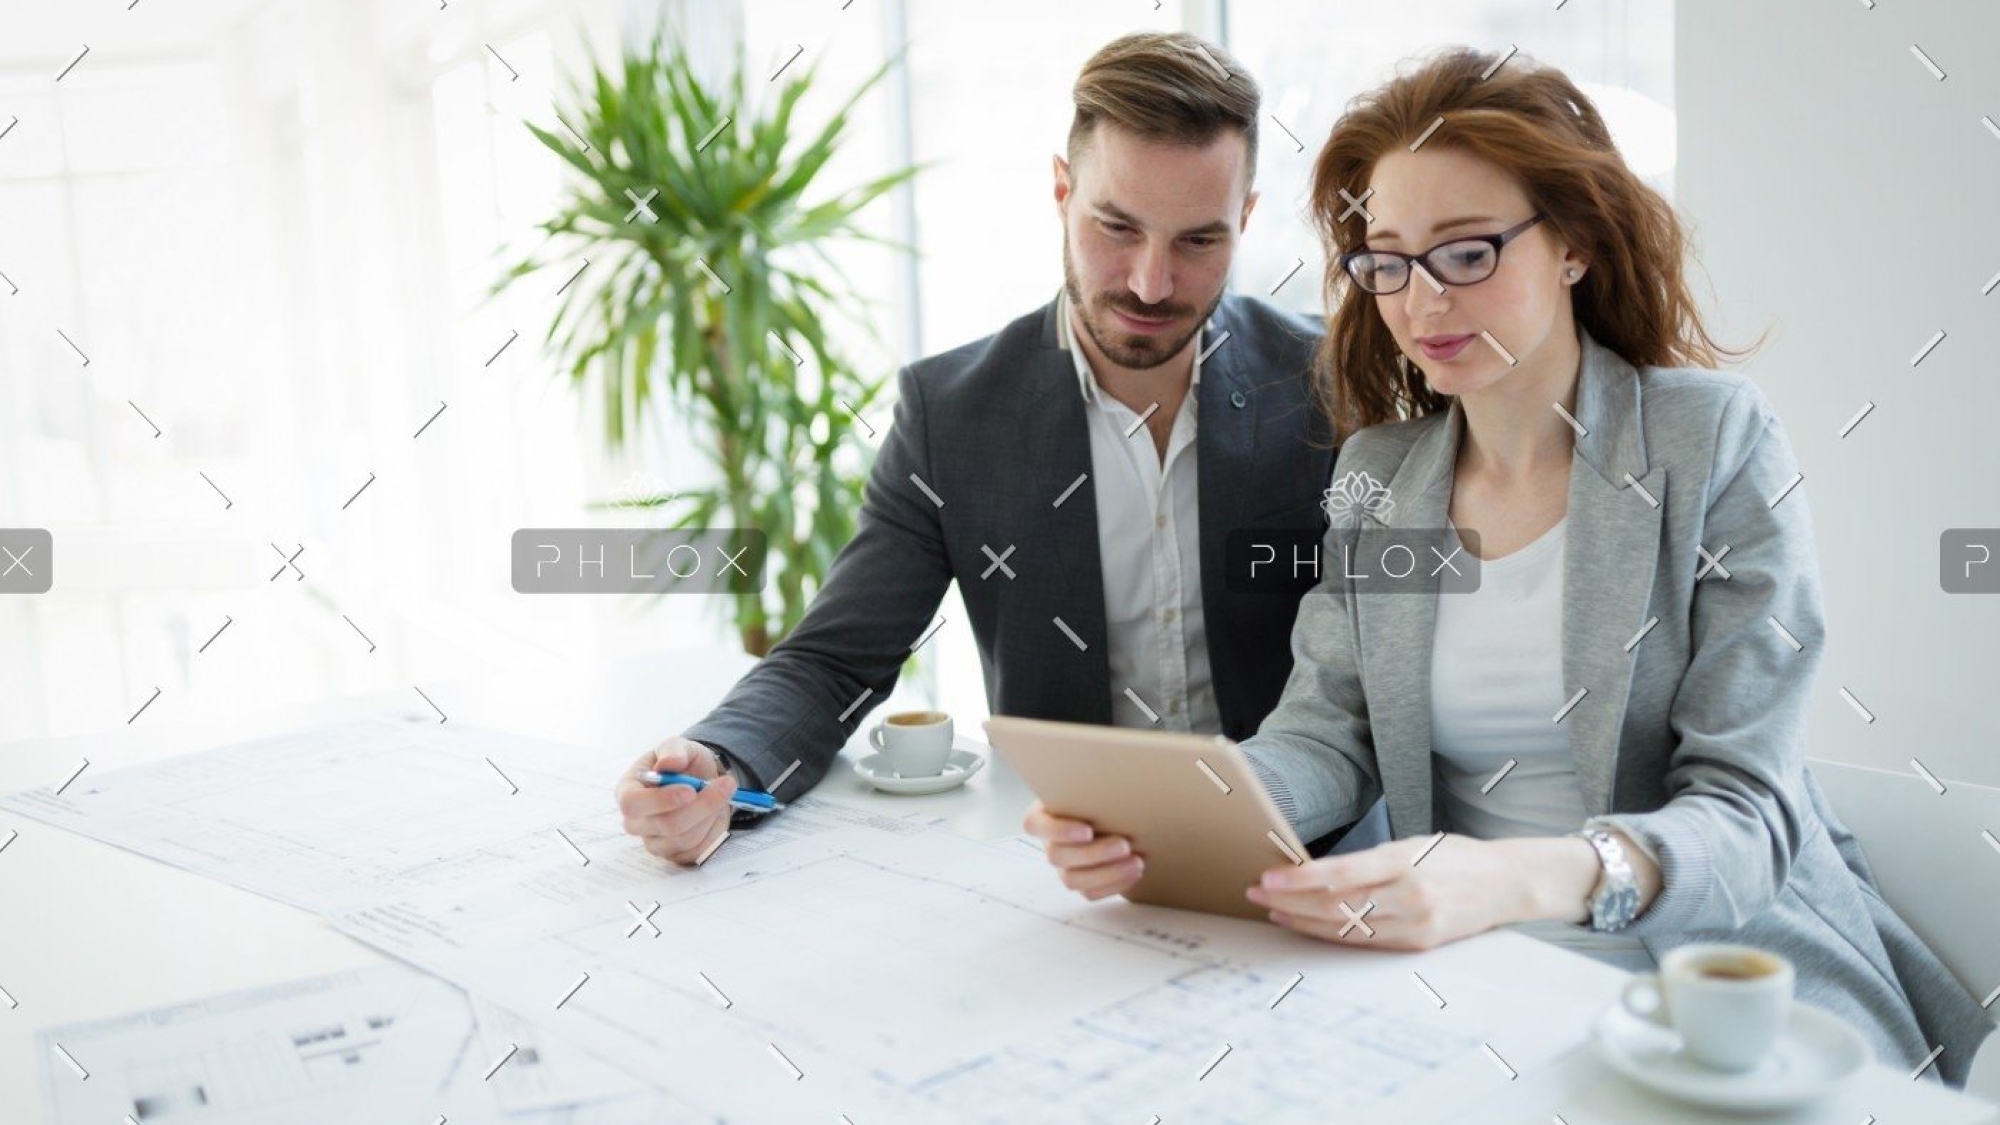 demo-attachment-2723-portrait-of-young-architect-woman-on-meeting-KFZCE3A